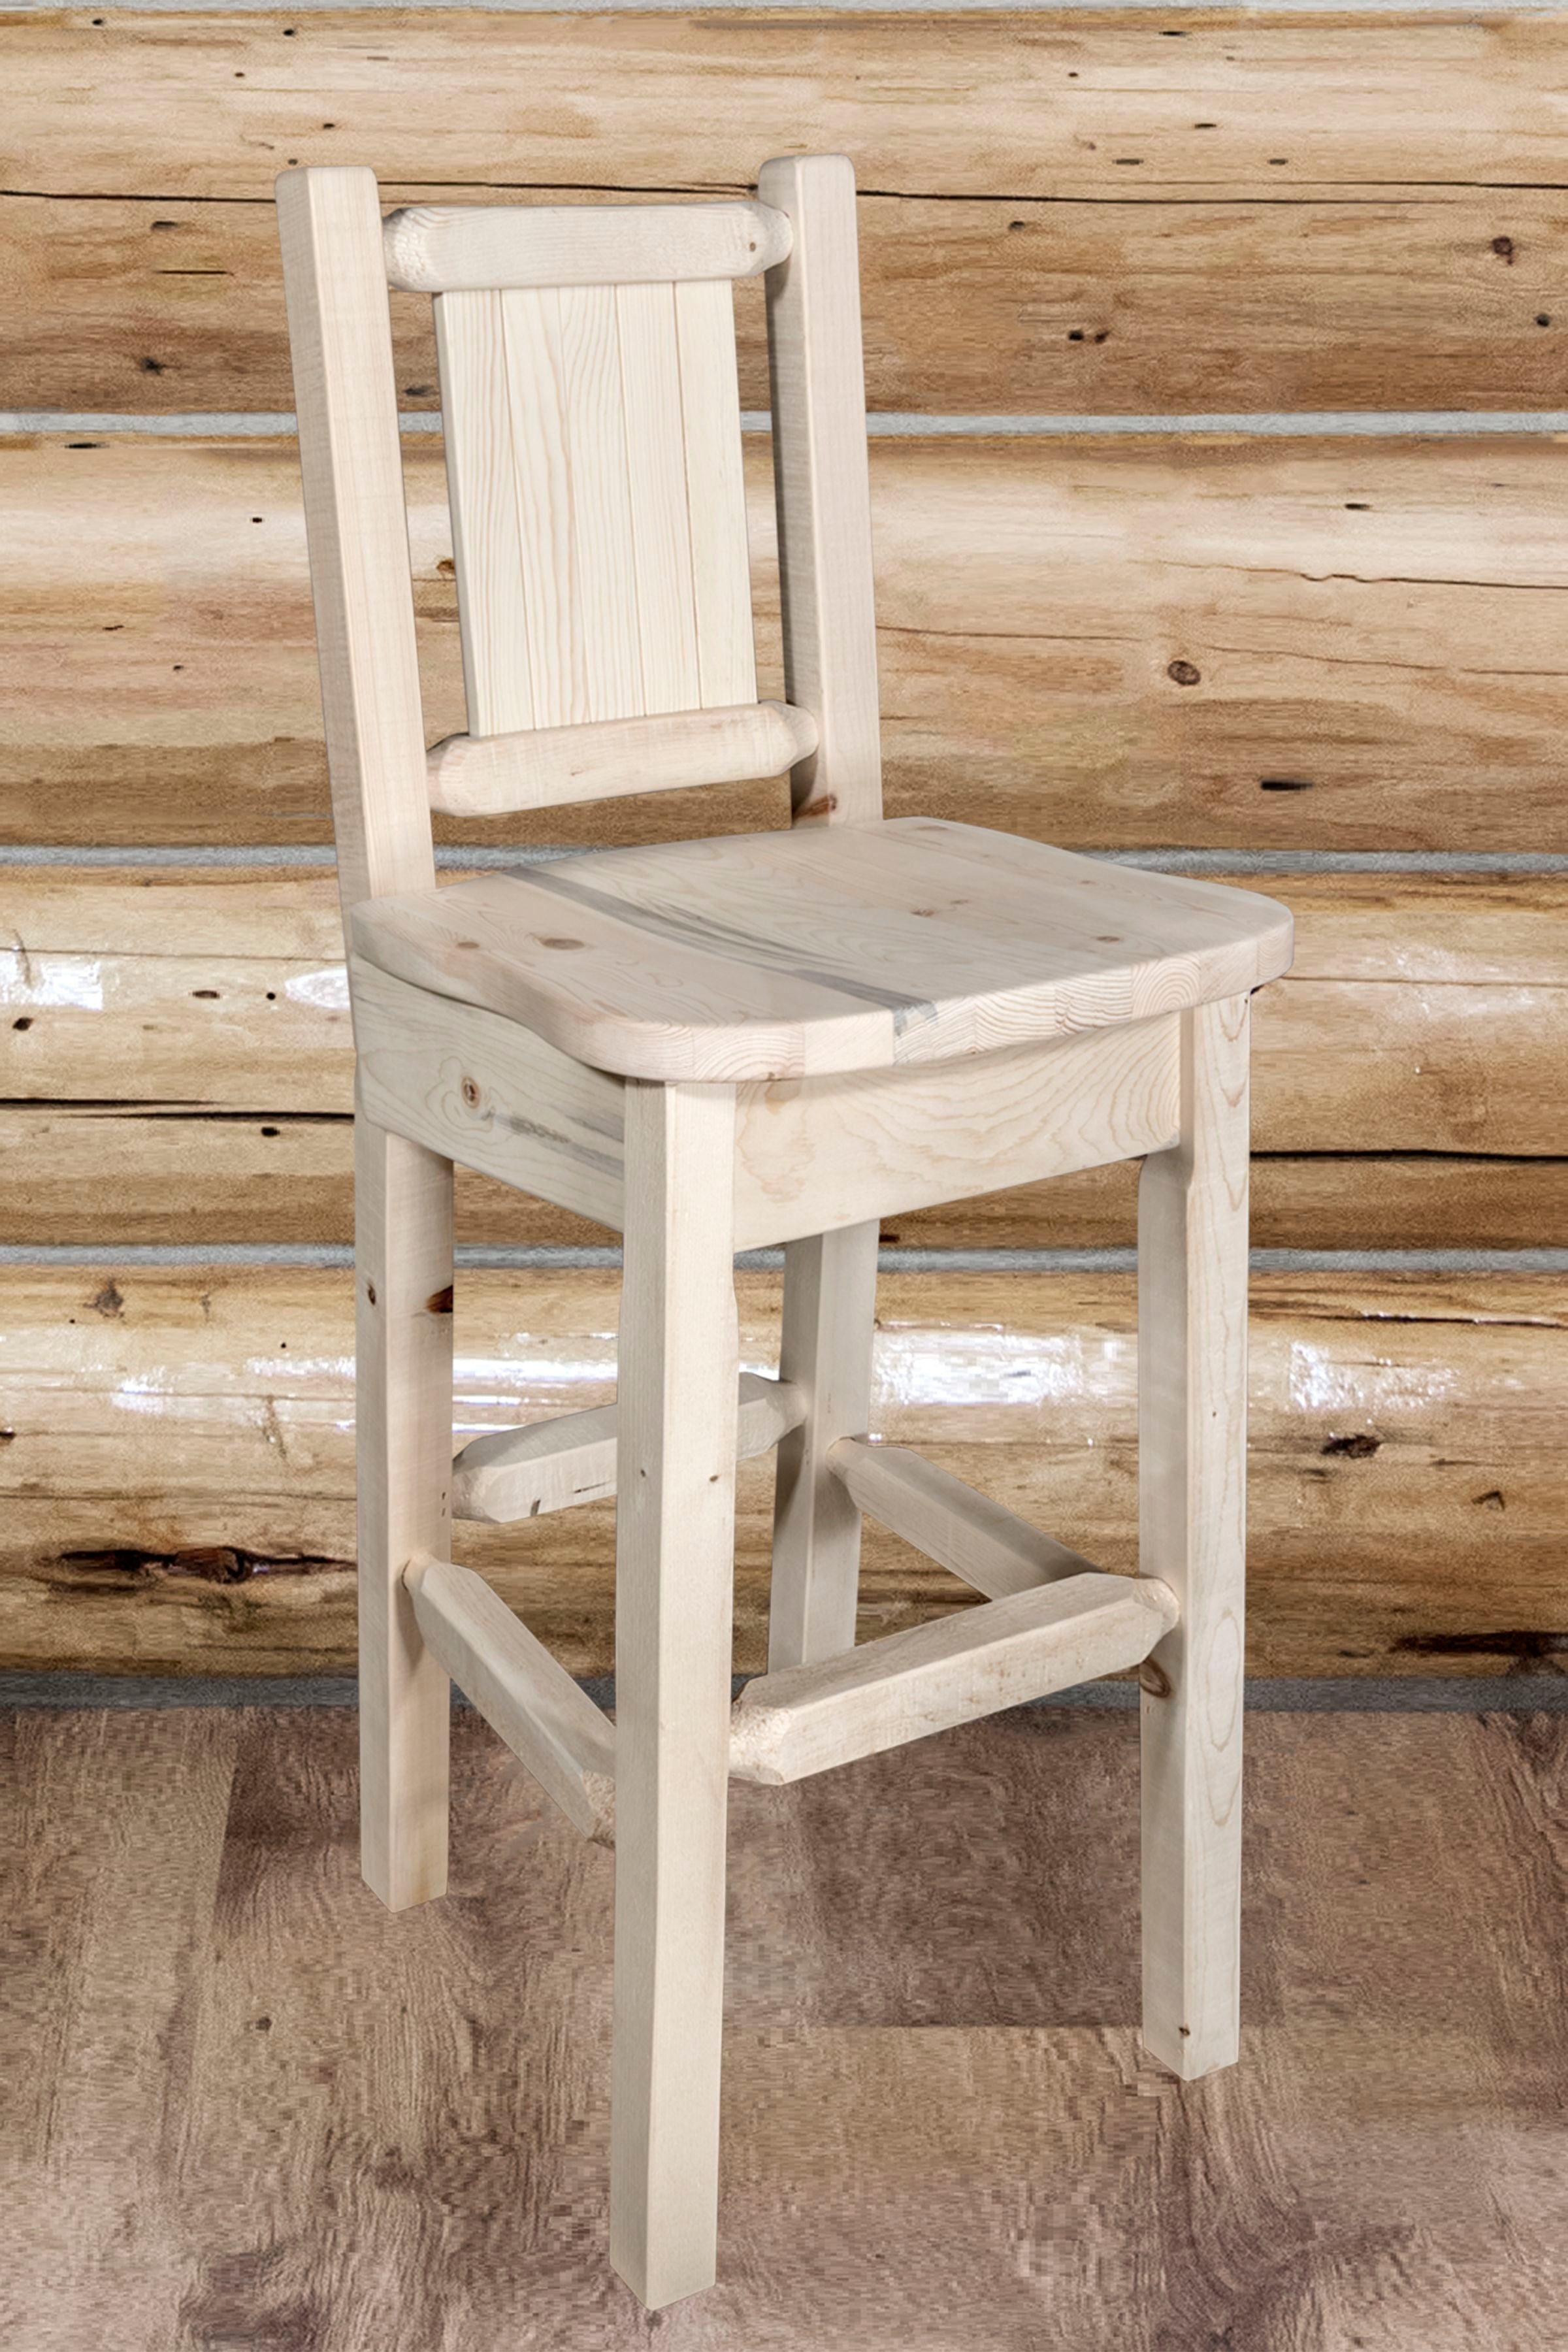 Montana Woodworks Homestead Collection Barstool w/ Back, w/ Laser Engraved Wolf Design